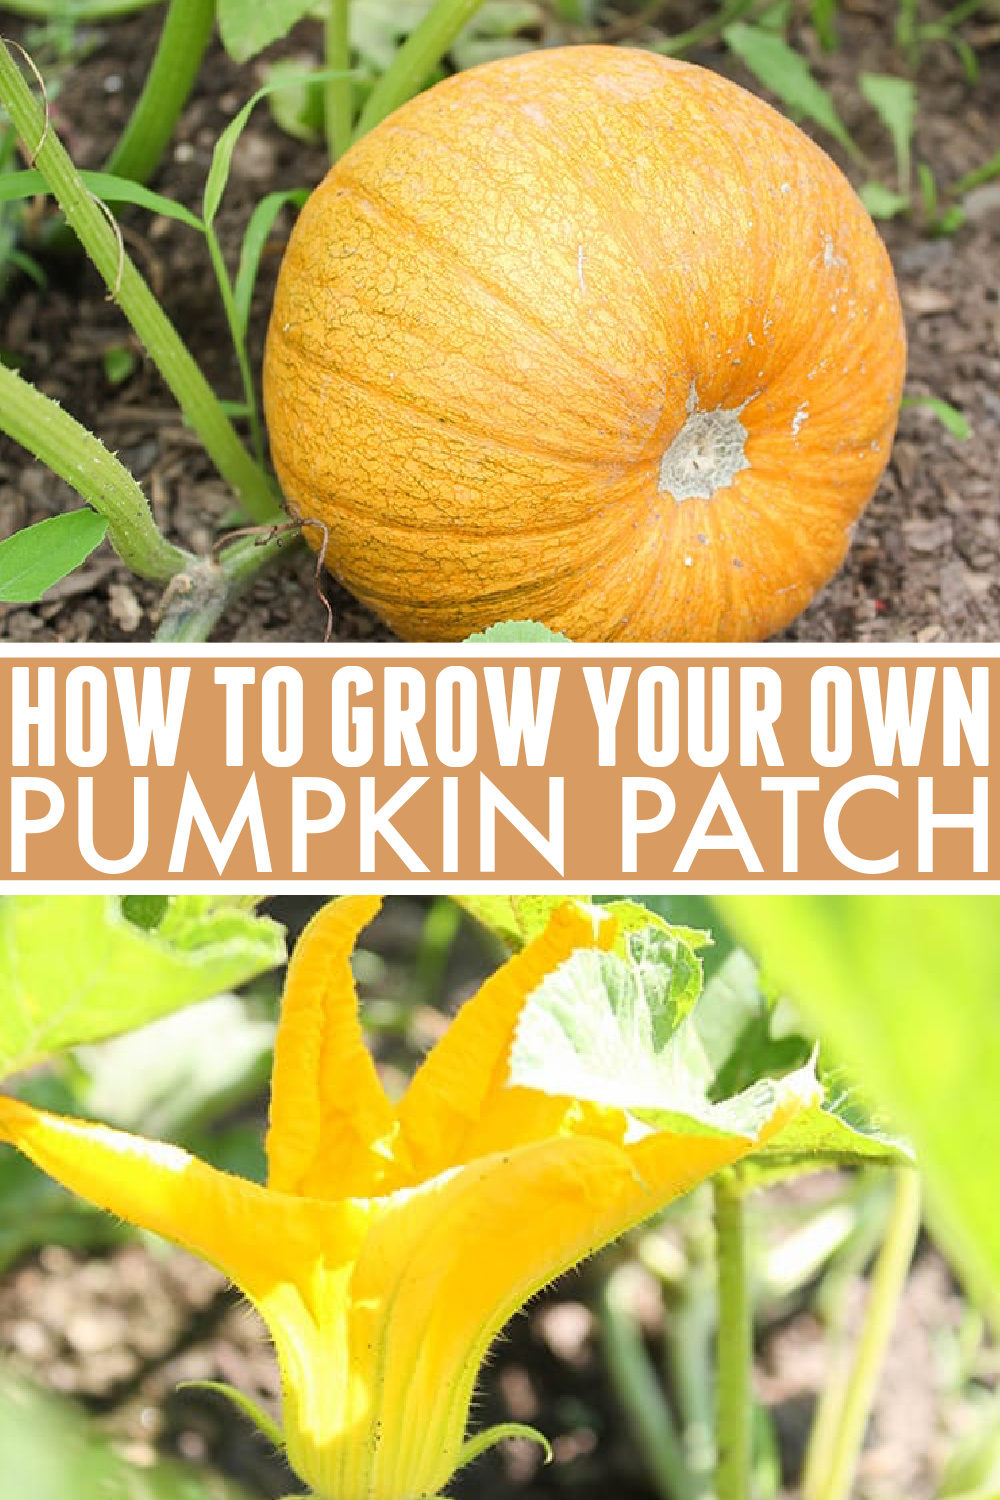 Growing a pumpkin patch: Instructions and growing stages photos.